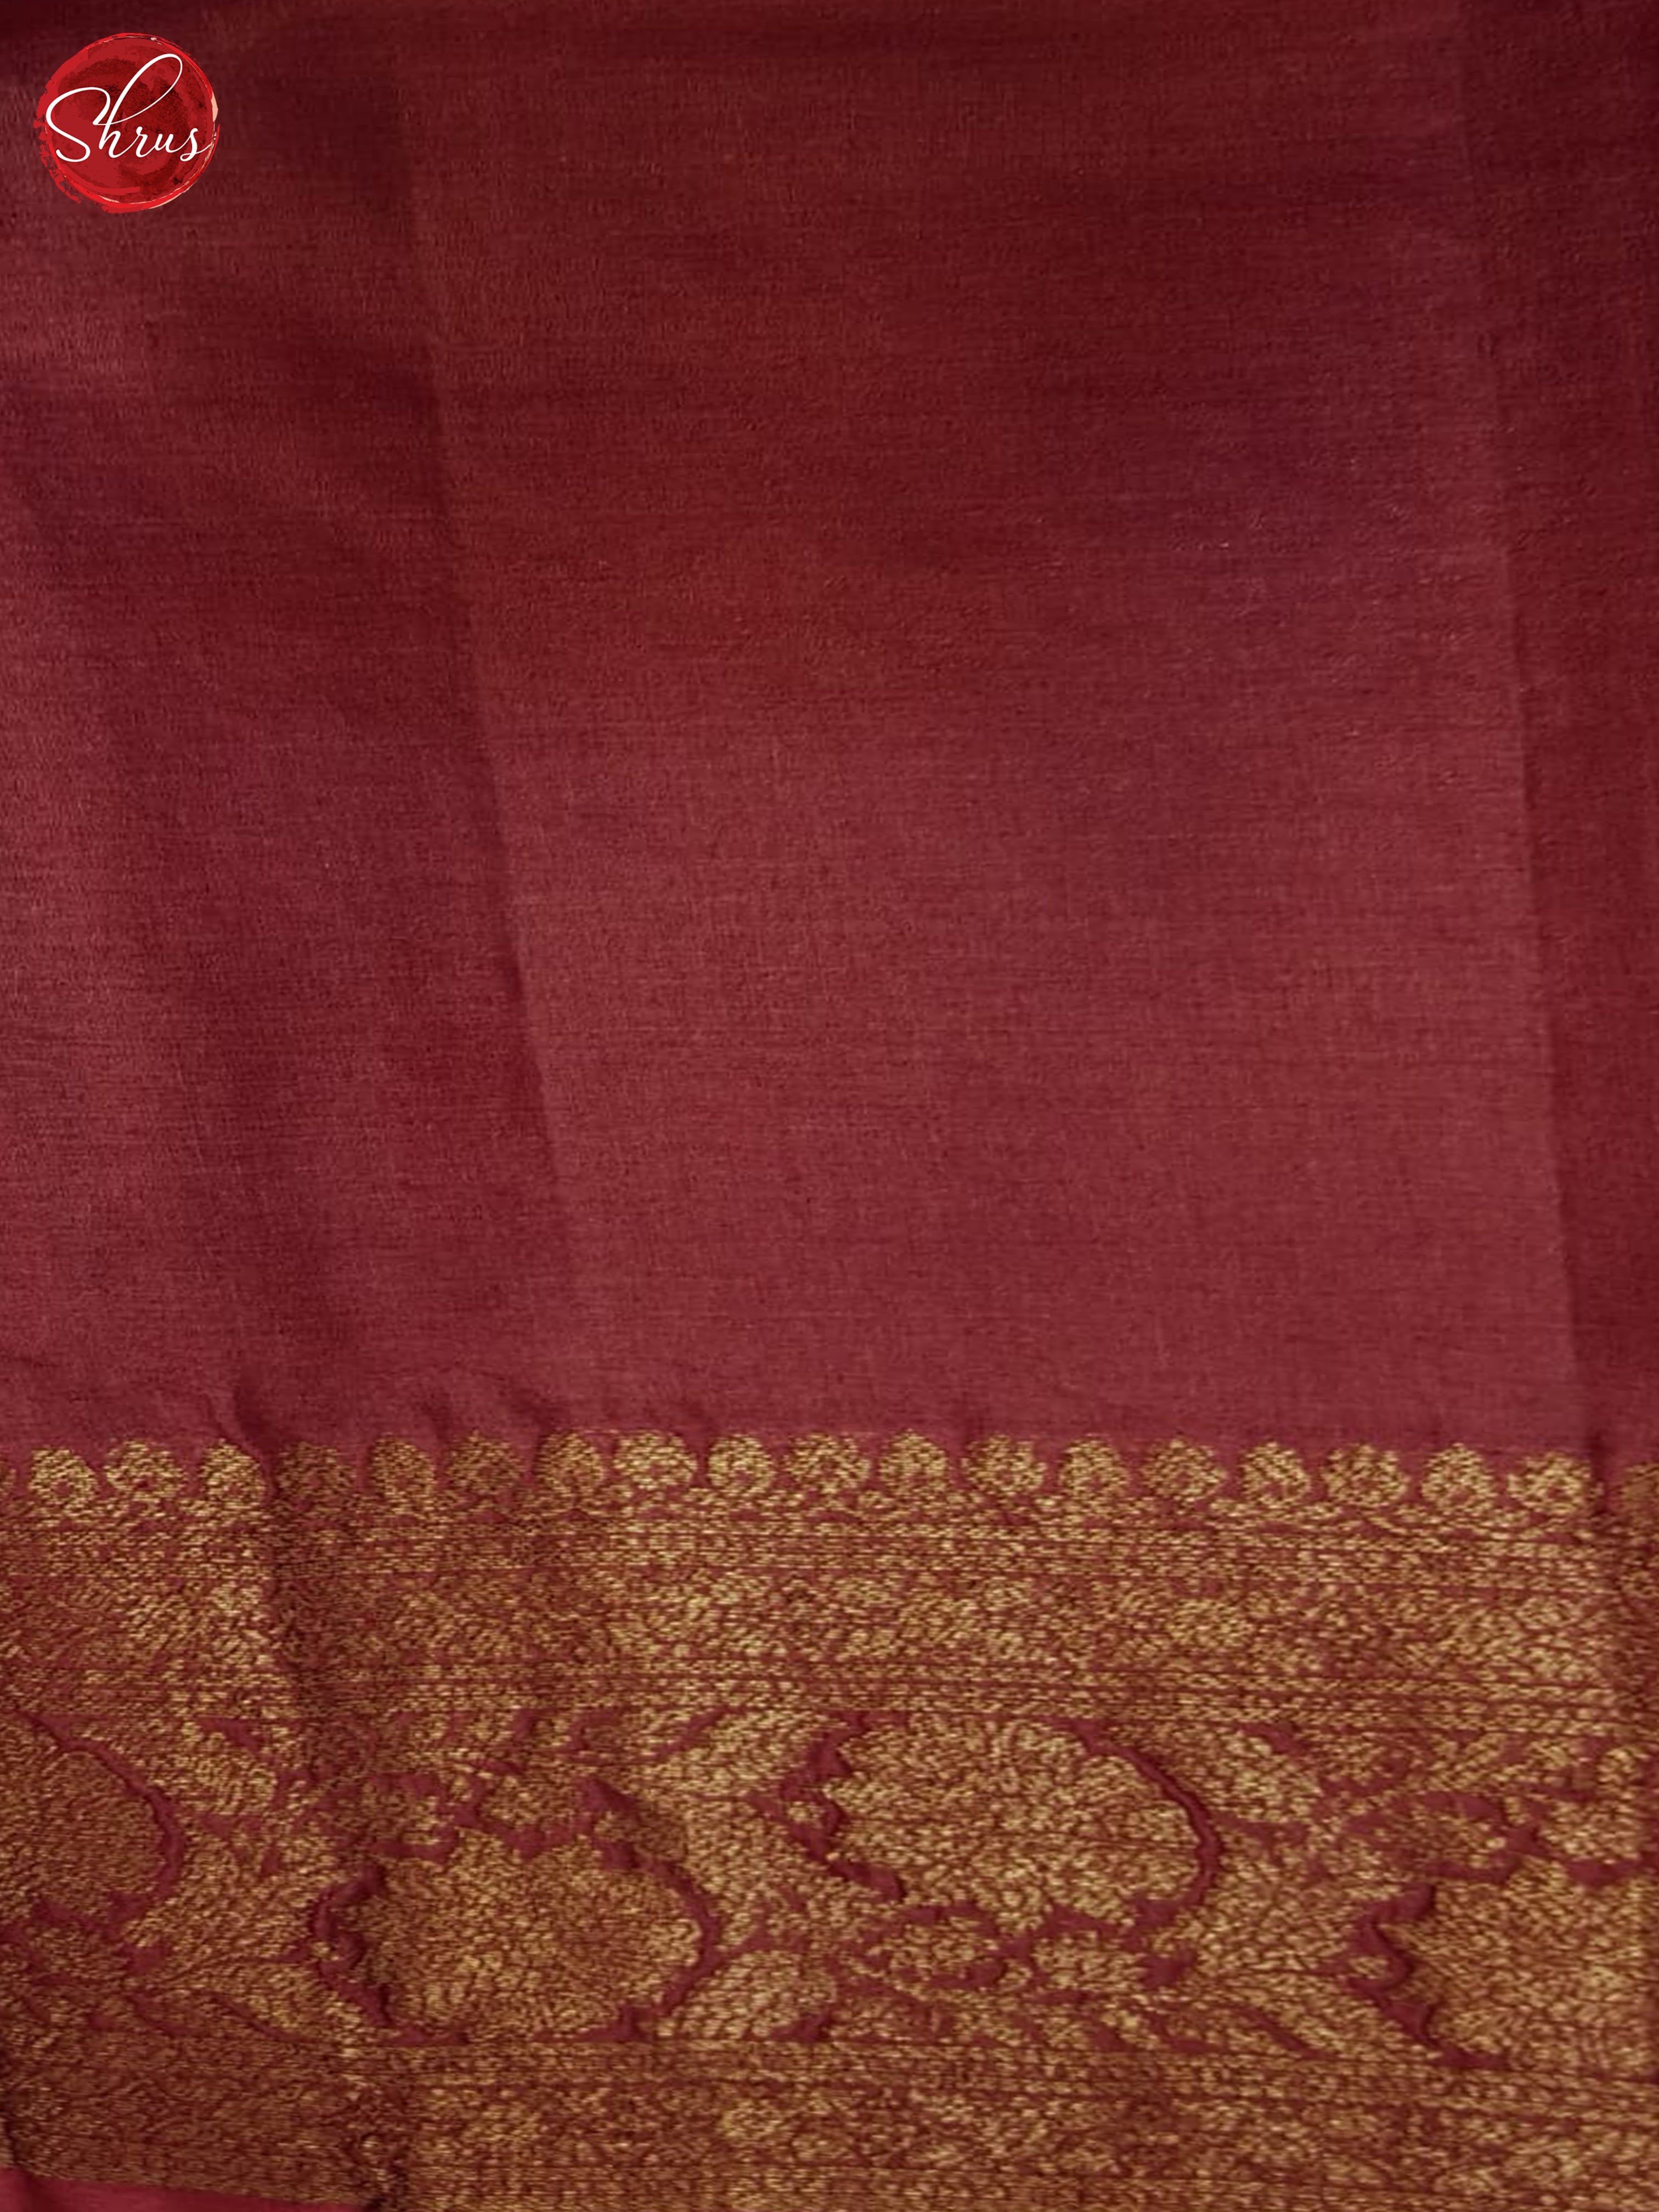 Green And Red- Tussar Saree - Shop on ShrusEternity.com